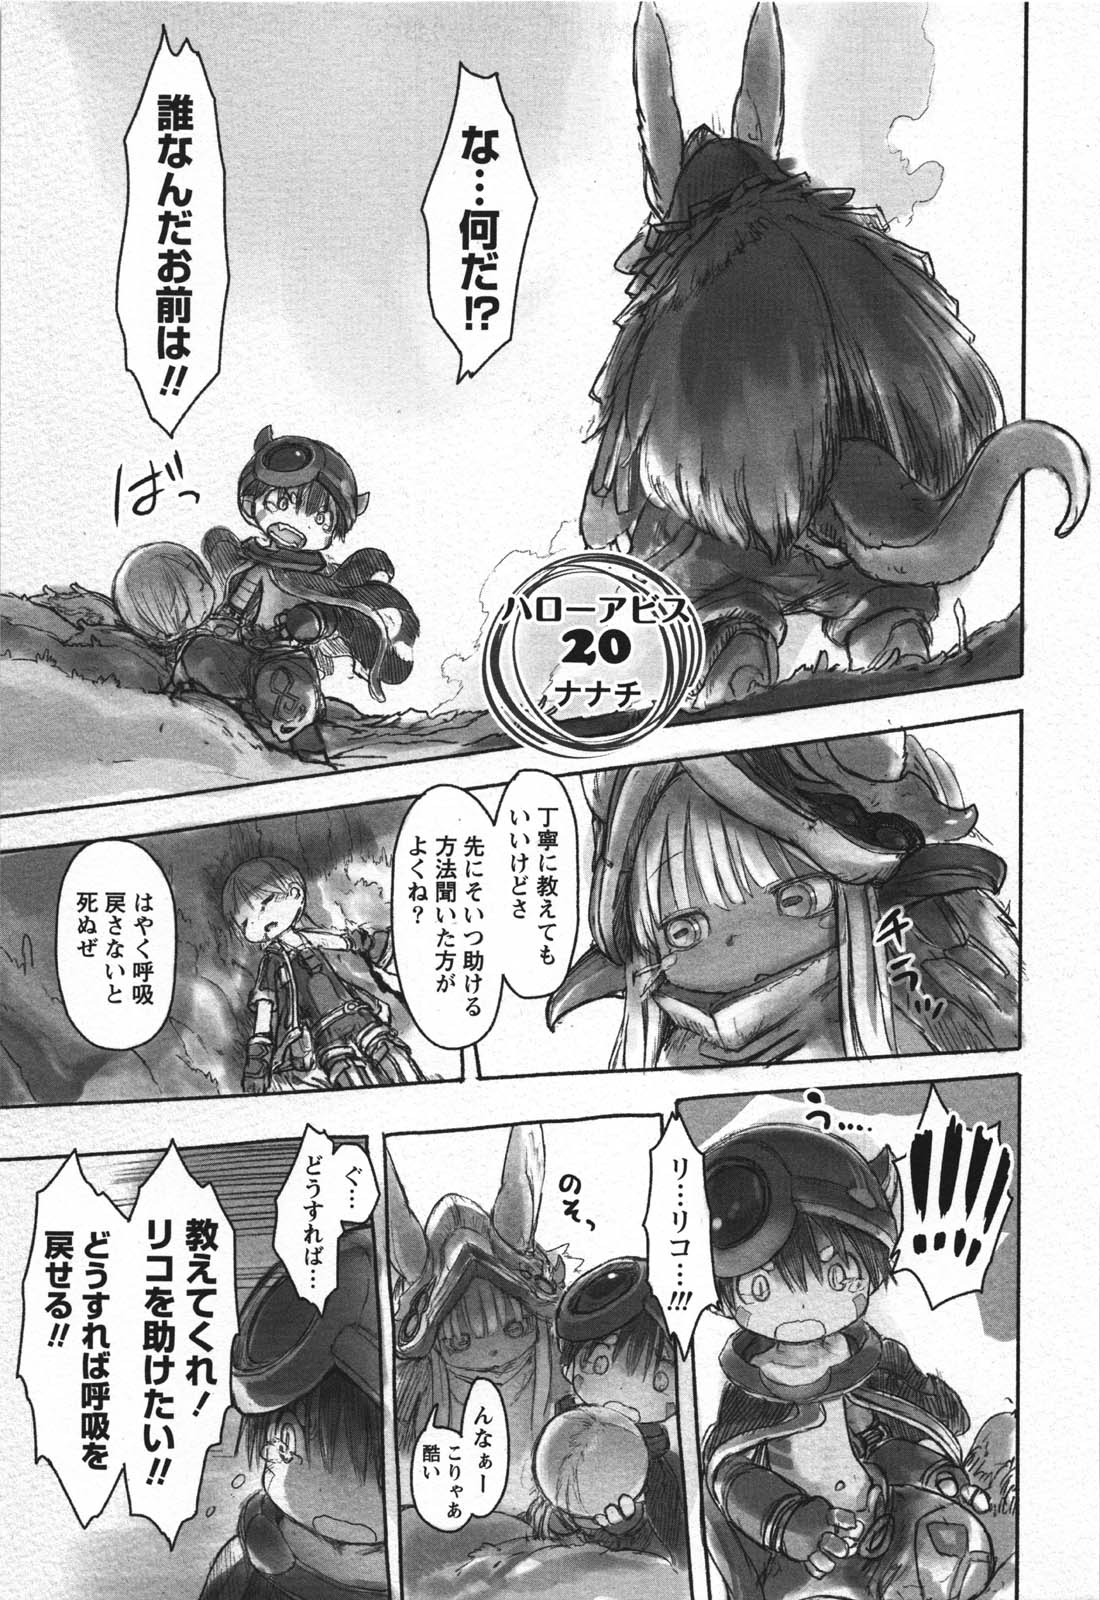 Made in Abyss Chapter 048, Made in Abyss Wiki